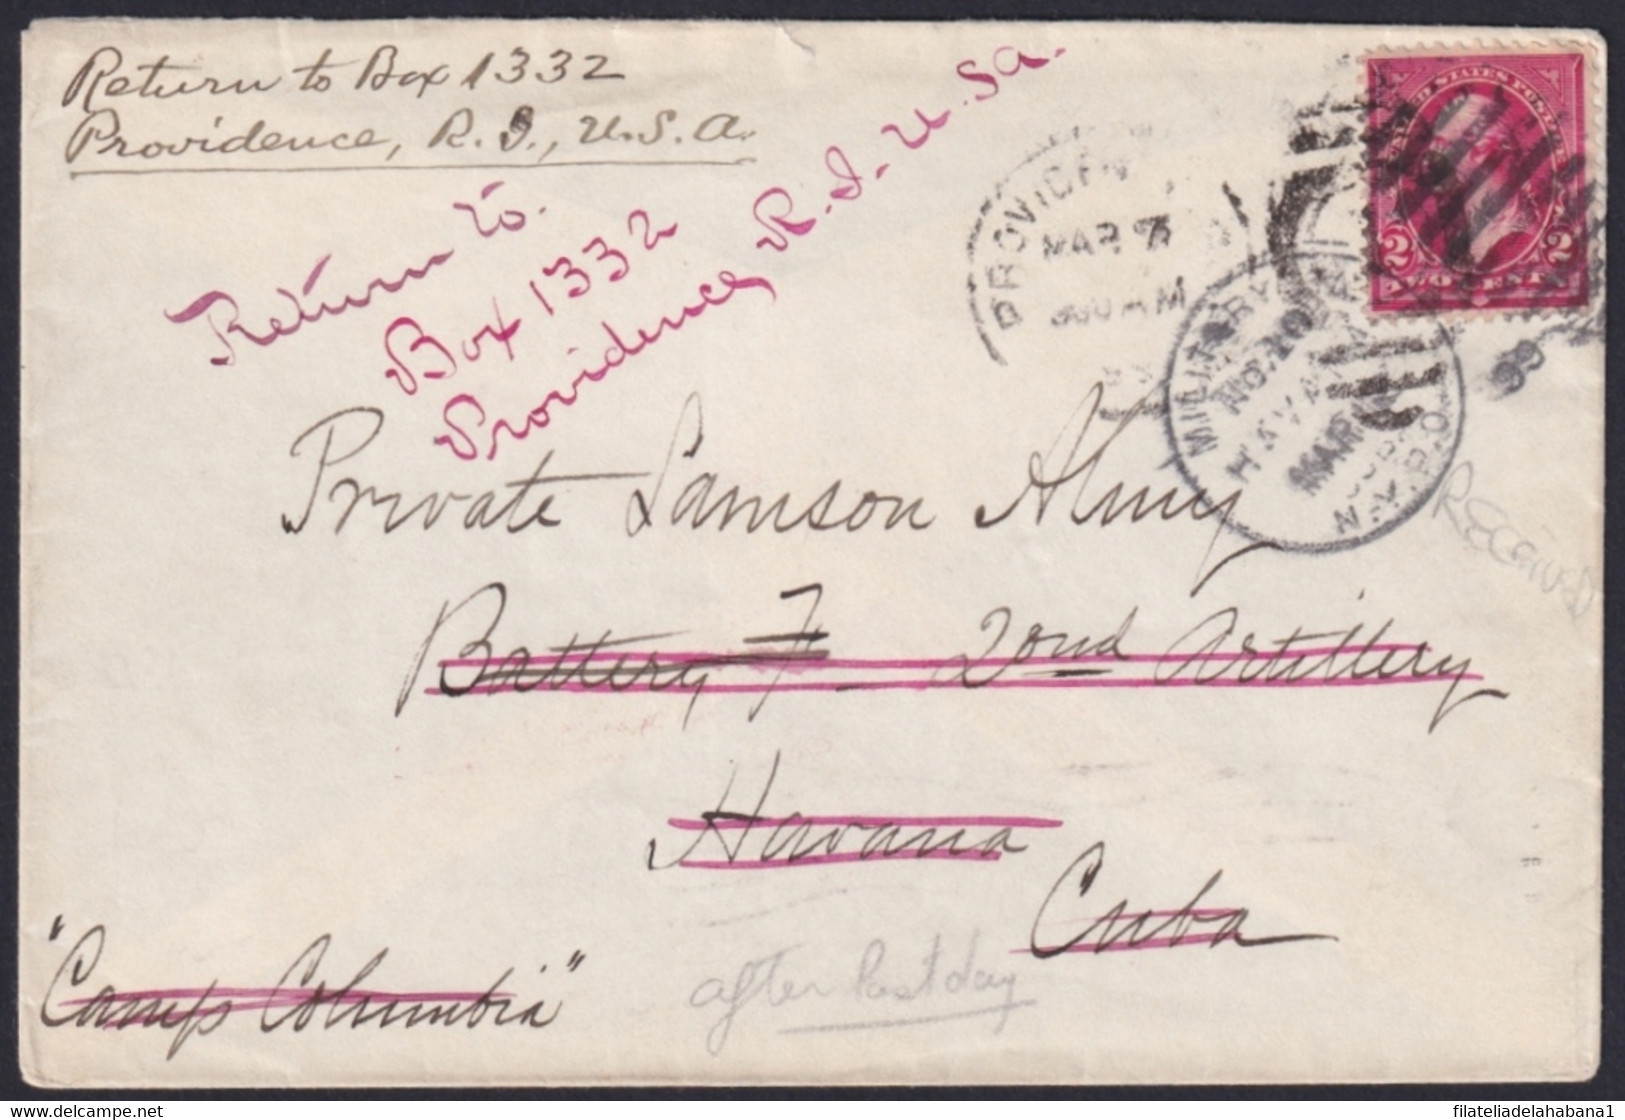 1899-H-257 CUBA US OCCUPATION 1899 MILITAR STATION HAVANA RETURNED COVER TO US. - Lettres & Documents